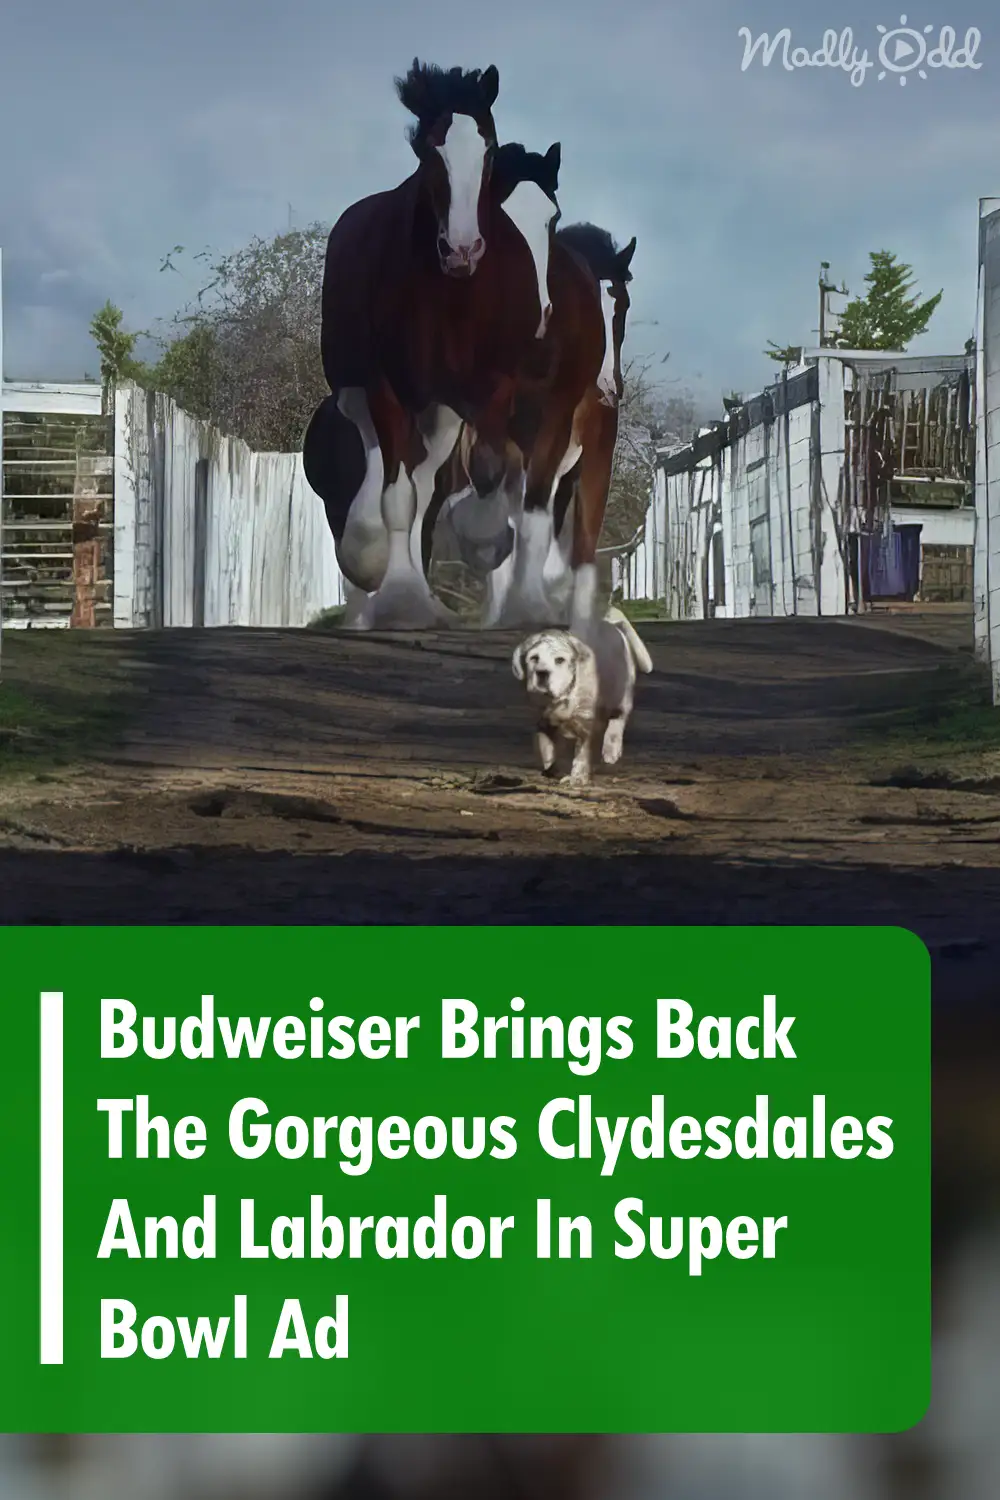 Budweiser Brings Back The Gorgeous Clydesdales And Labrador In Super Bowl Ad